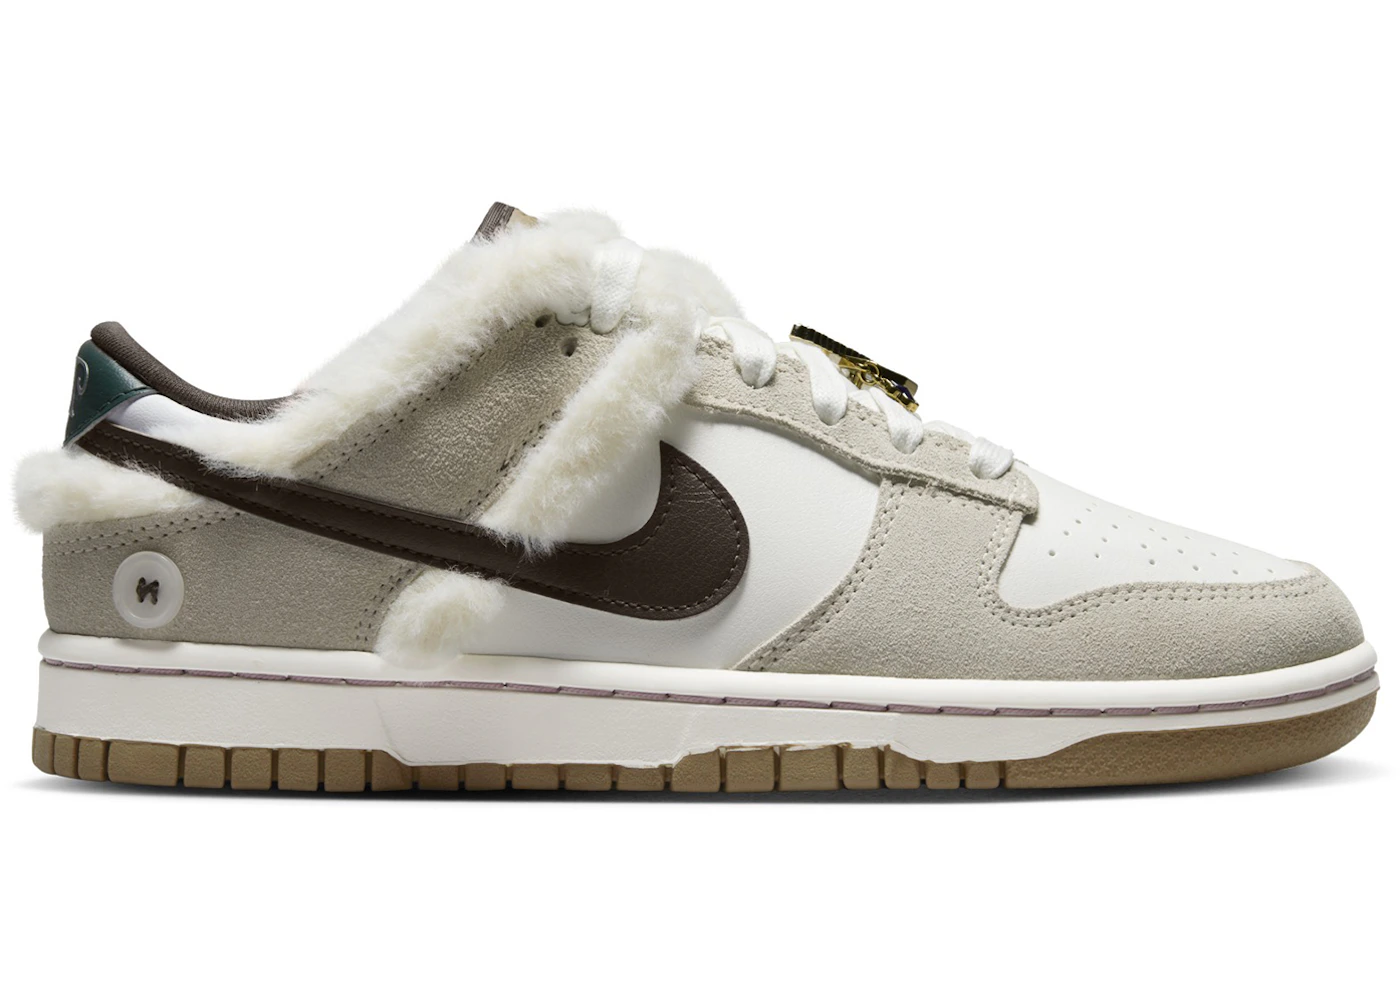 Nike Dunk Low Mink and Jewels: Bold and Playful Sneakers with Mink and Jewels Design